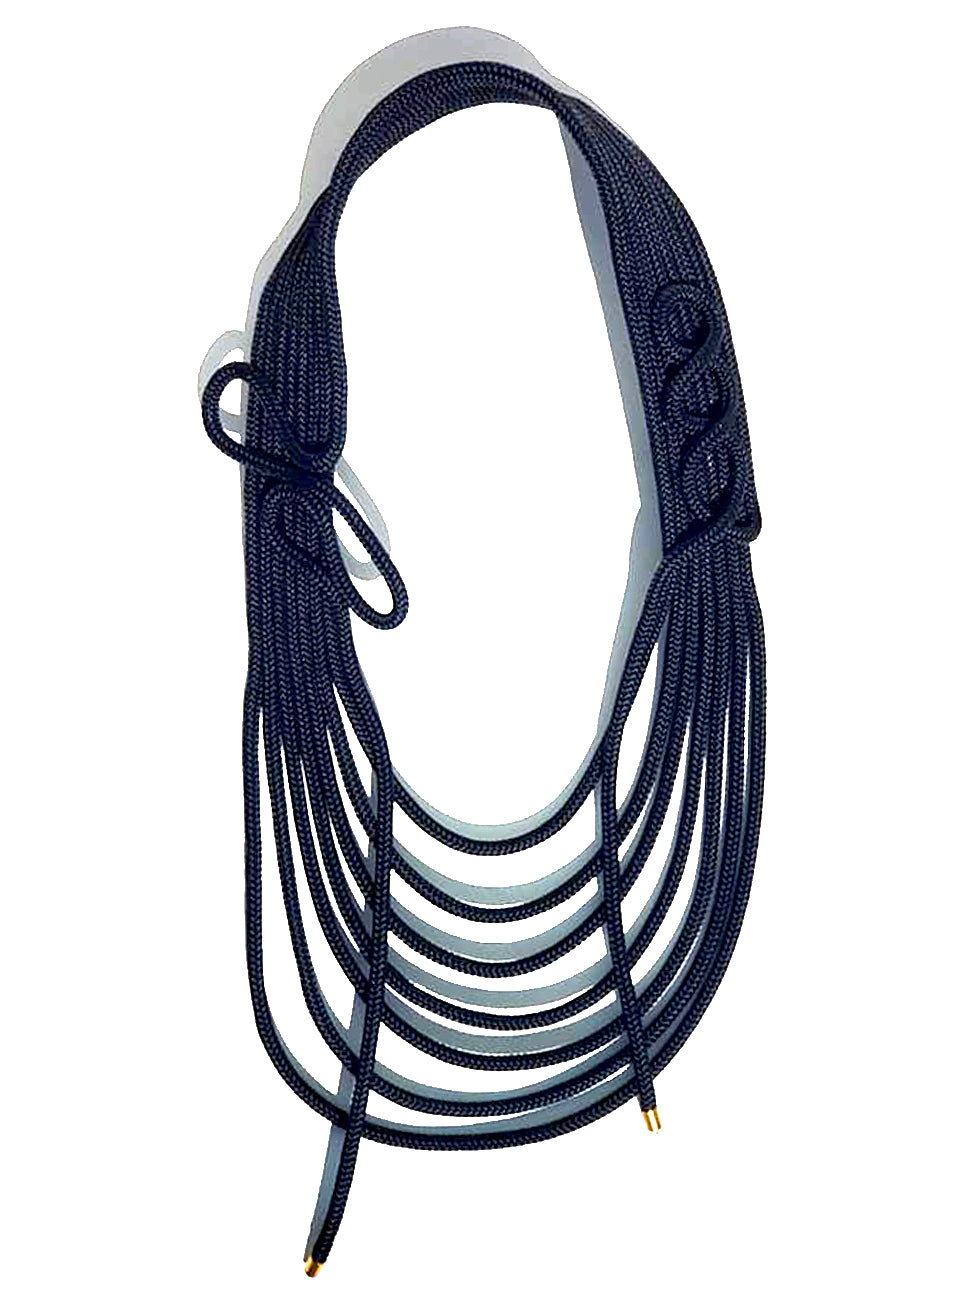 Modernist Necklace Nautical Rope